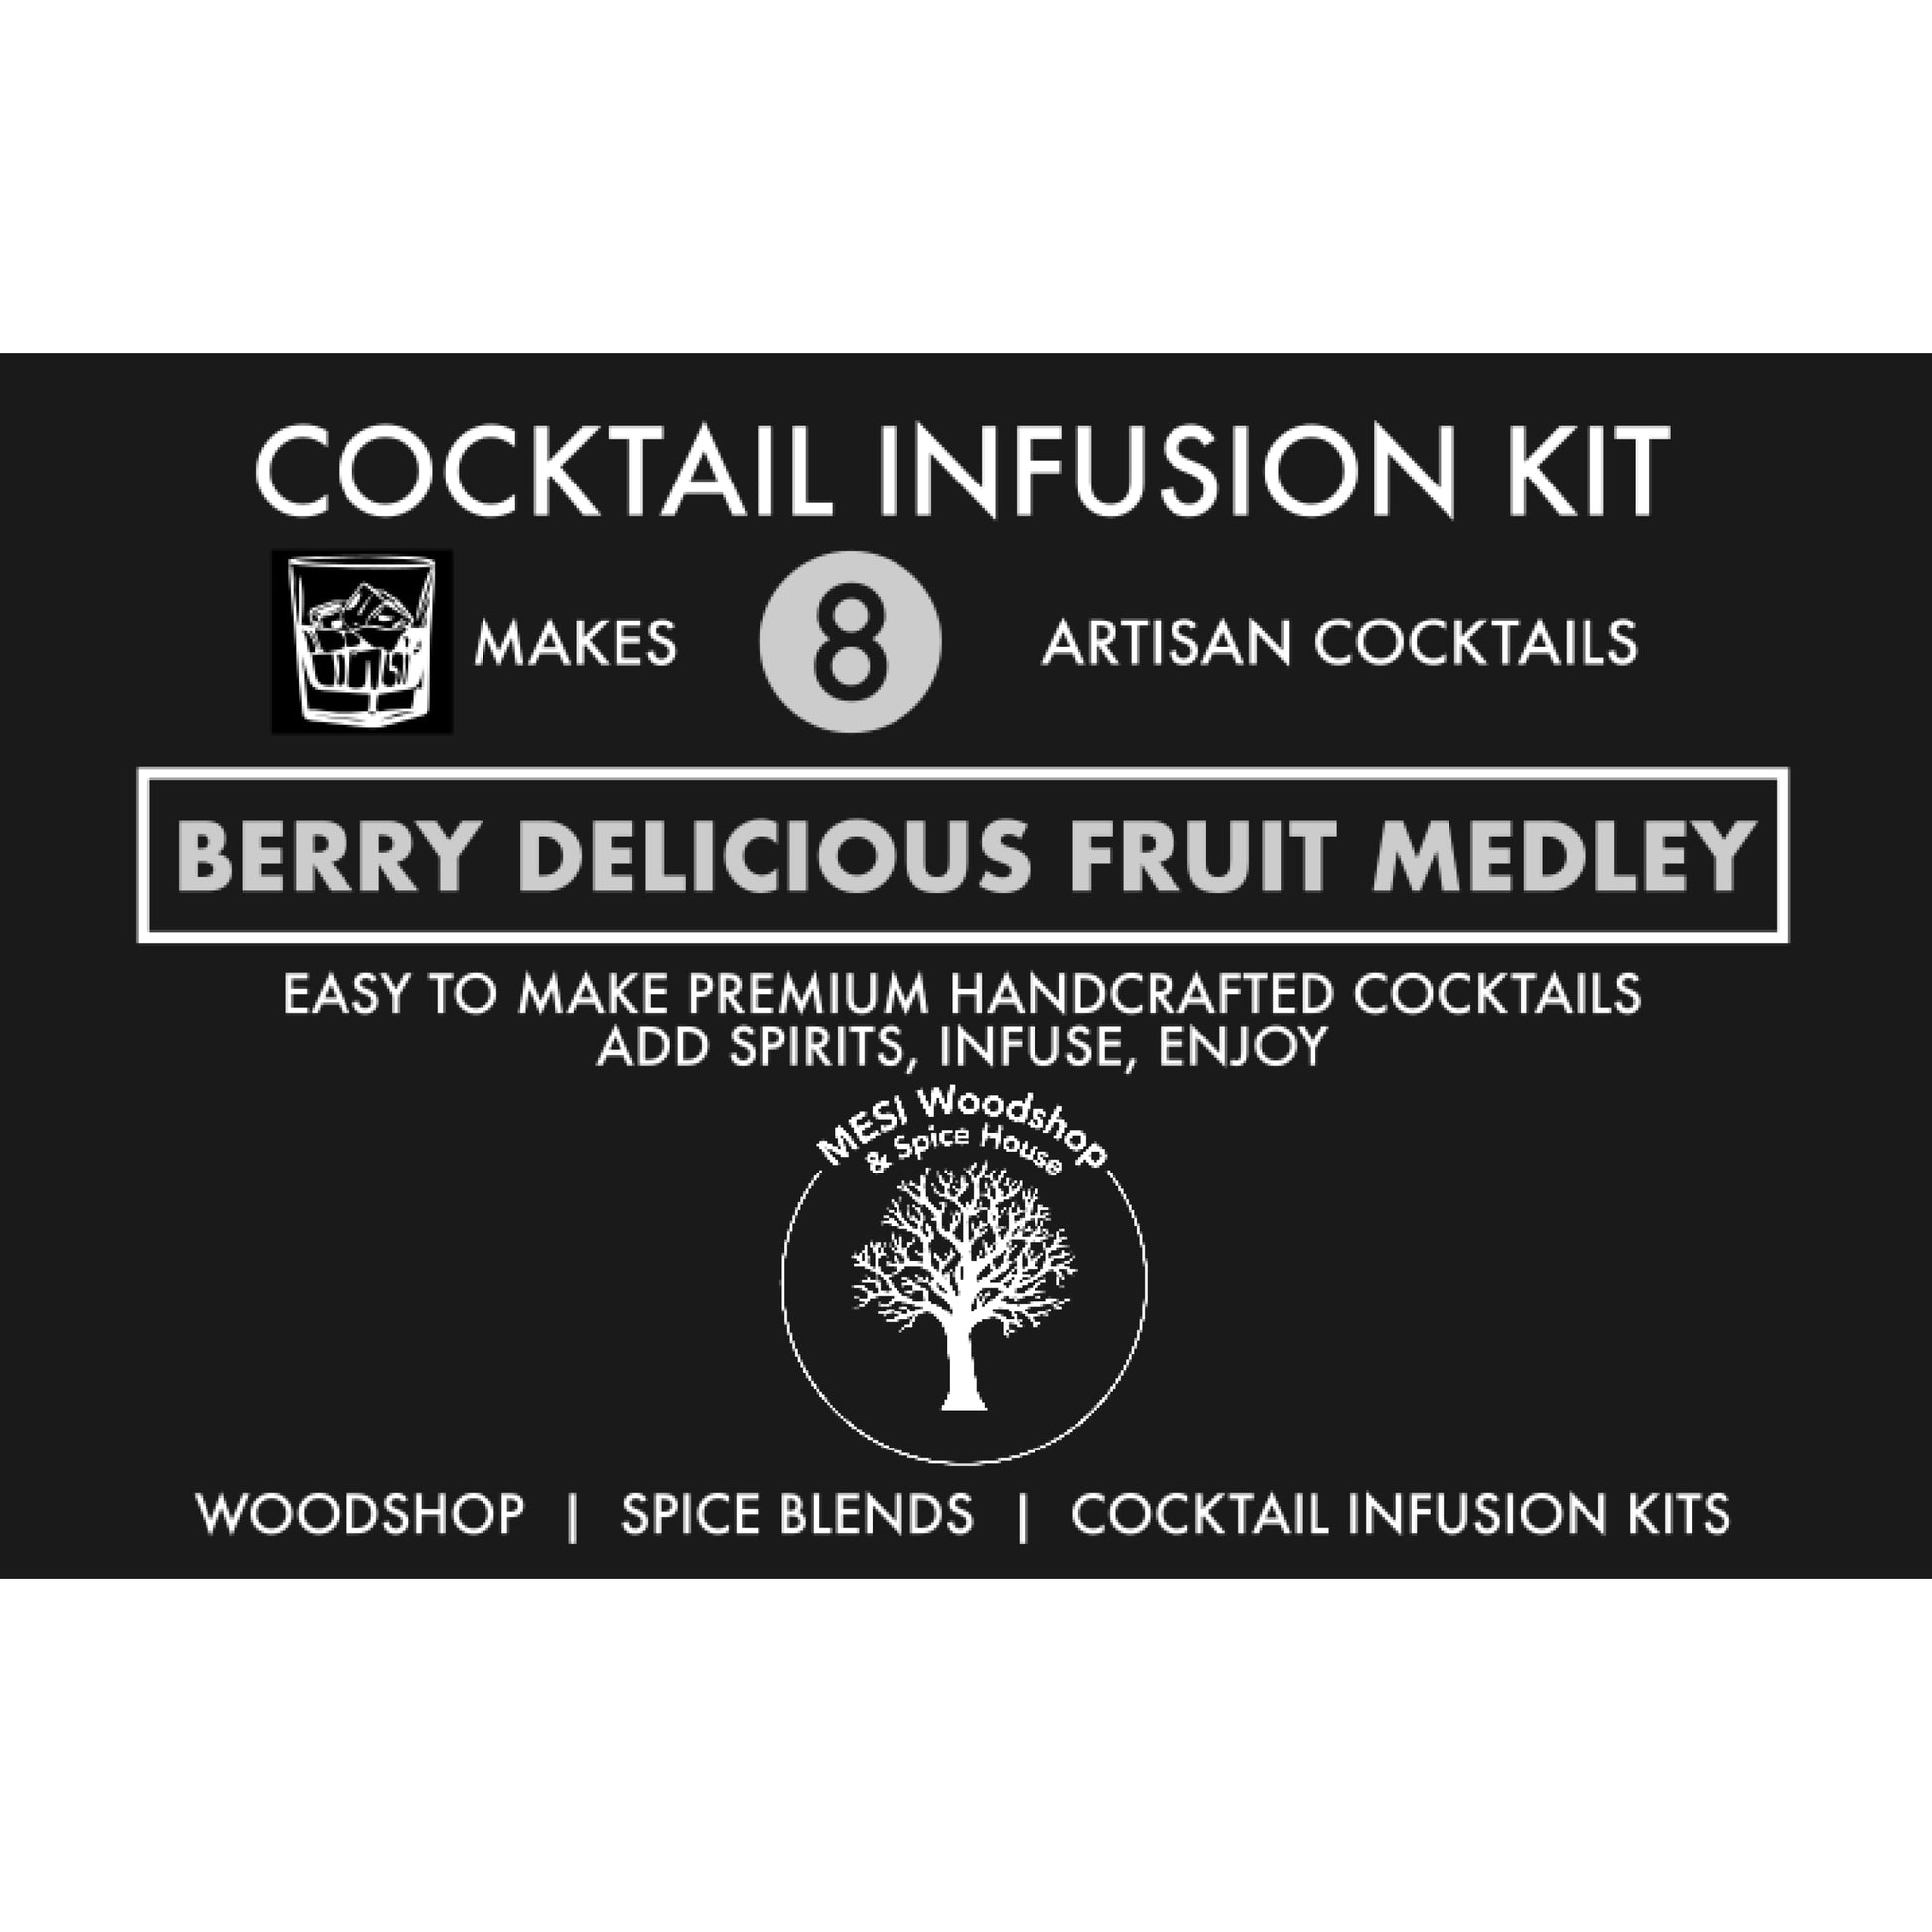 Berry Delicious Fruit Medley Cocktail Infusion Kit